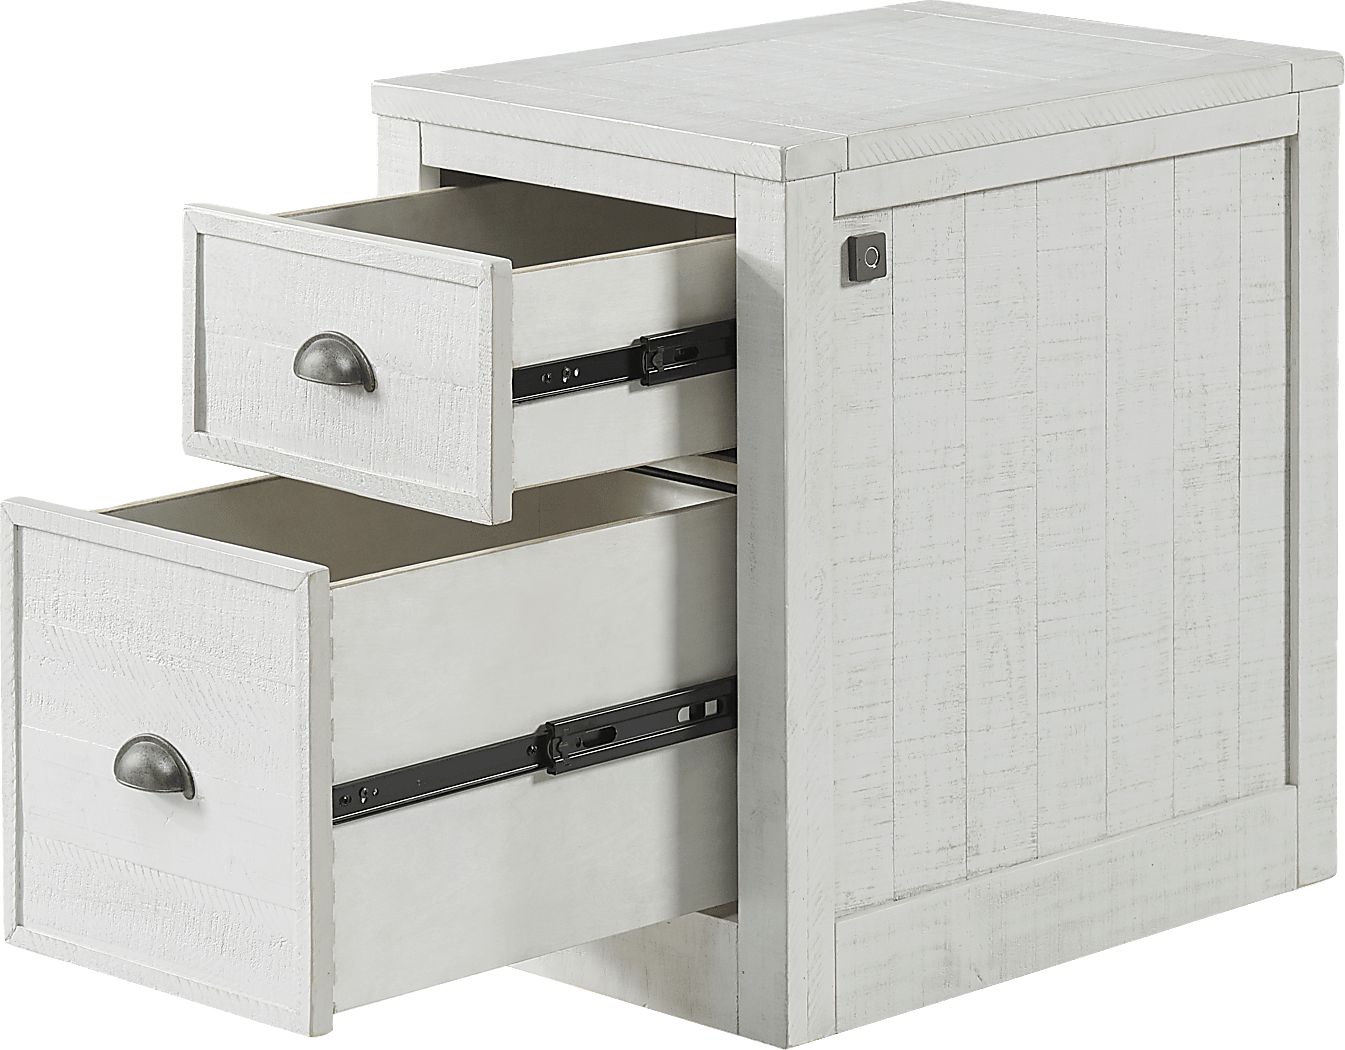 Rooms To Go Trevose White File Cabinet with Fingerprint Lock